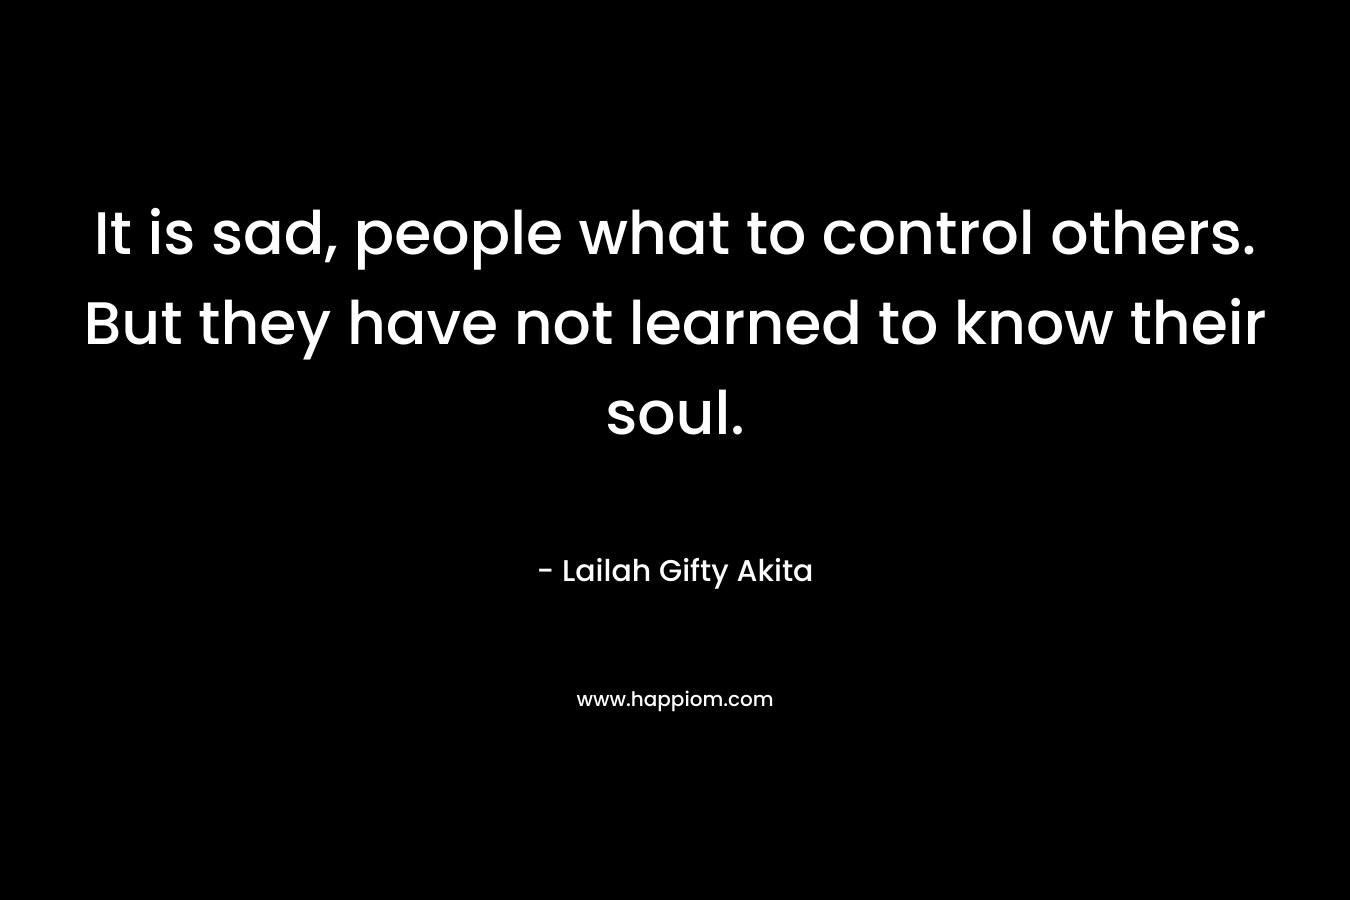 It is sad, people what to control others. But they have not learned to know their soul.